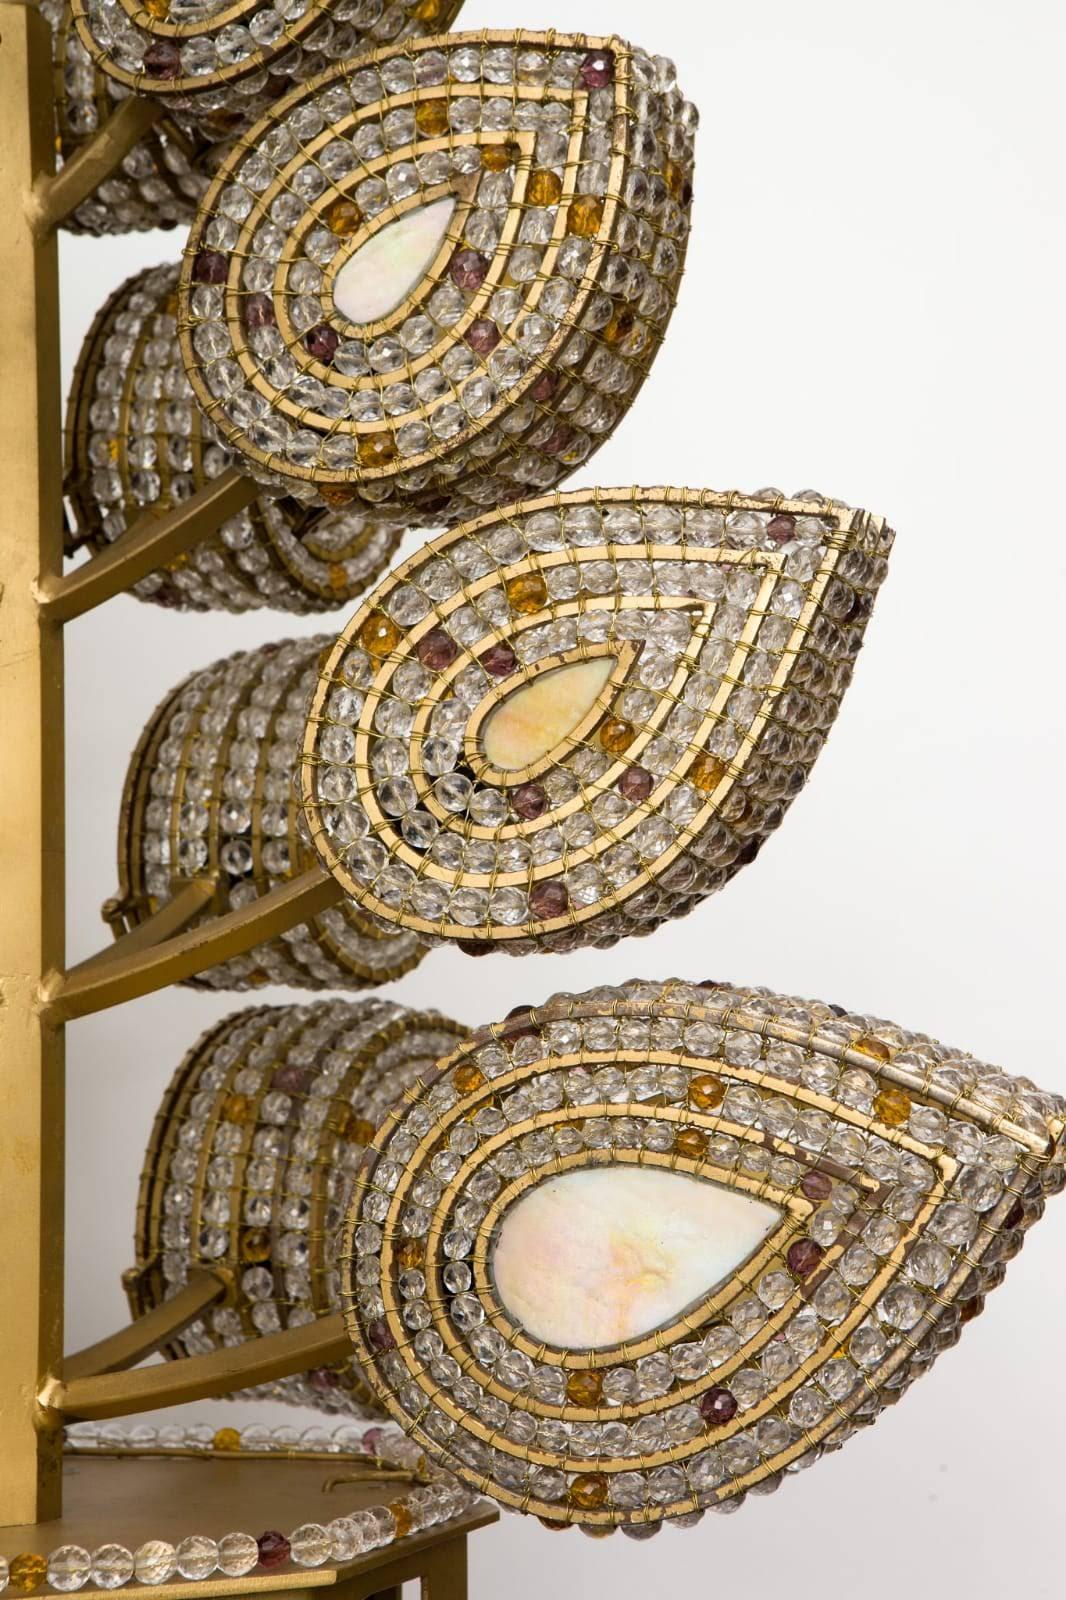 Handcrafted chandelier composed of a gold colored iron frame interlaced by more than 5,000 faceted glass beads and Mother of Pearl like Stained Glass on Center of Each Leaf.
Each leaf contains a candelabra socket accessible by a hinged door. Conical